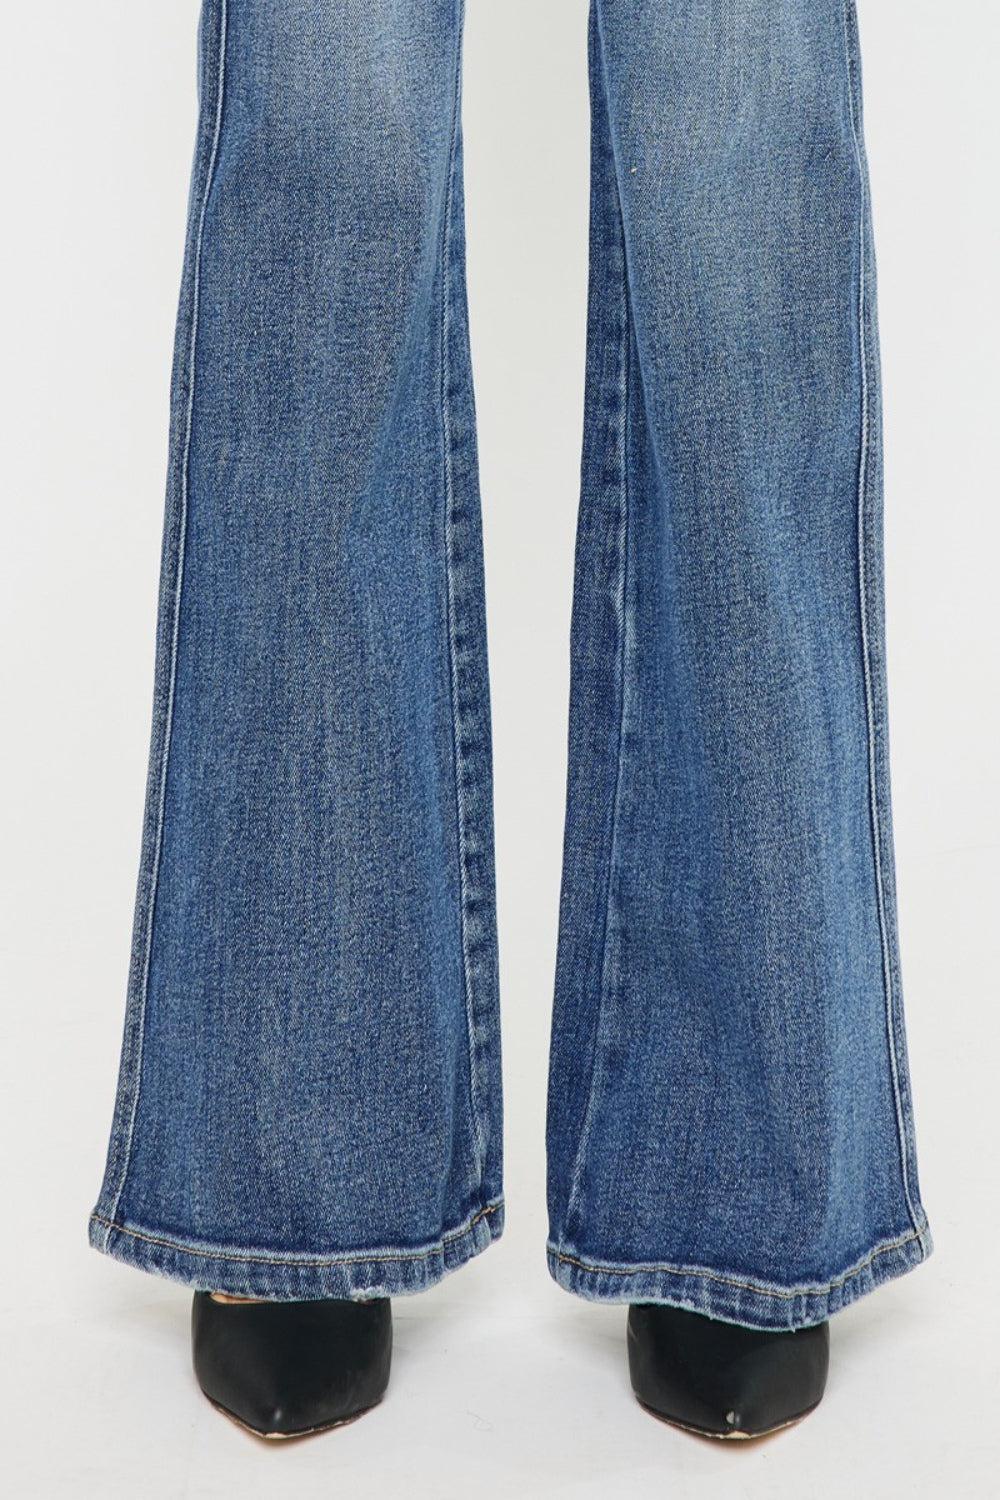 a pair of blue jeans with black heels